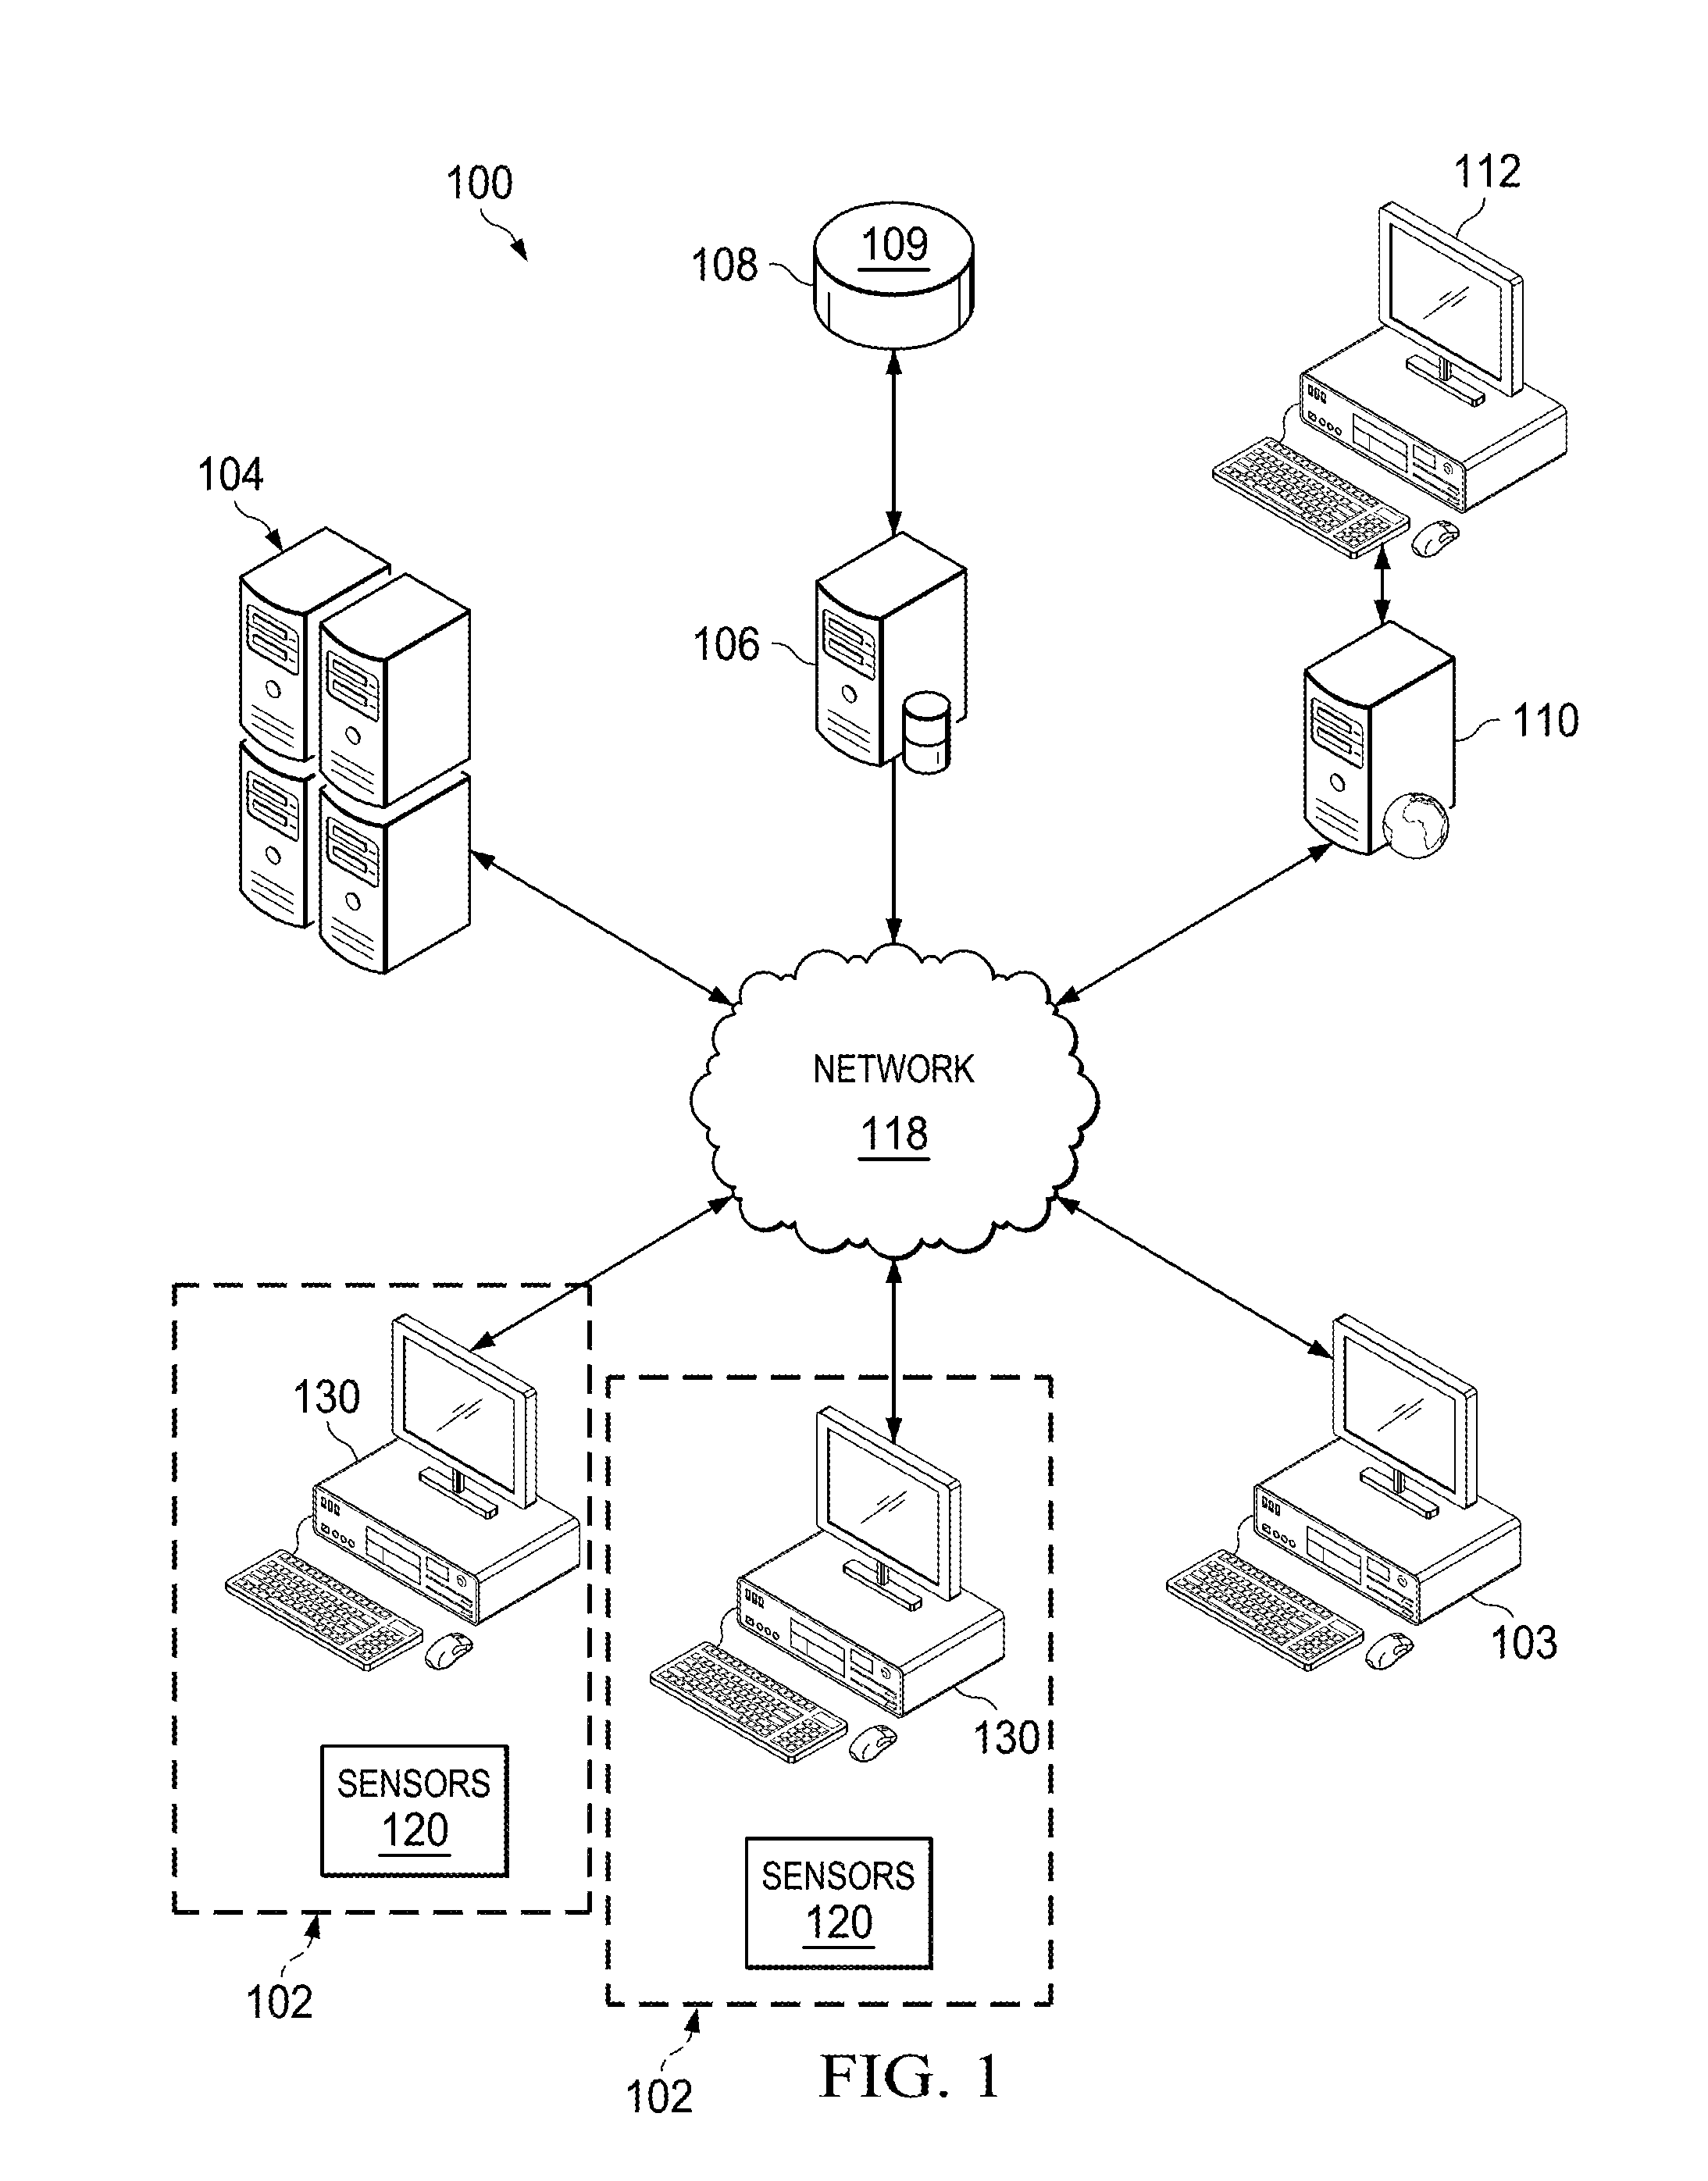 Chair Pad System and Associated, Computer Medium and Computer-Implemented Methods for Monitoring and Improving Health and Productivity of Employees